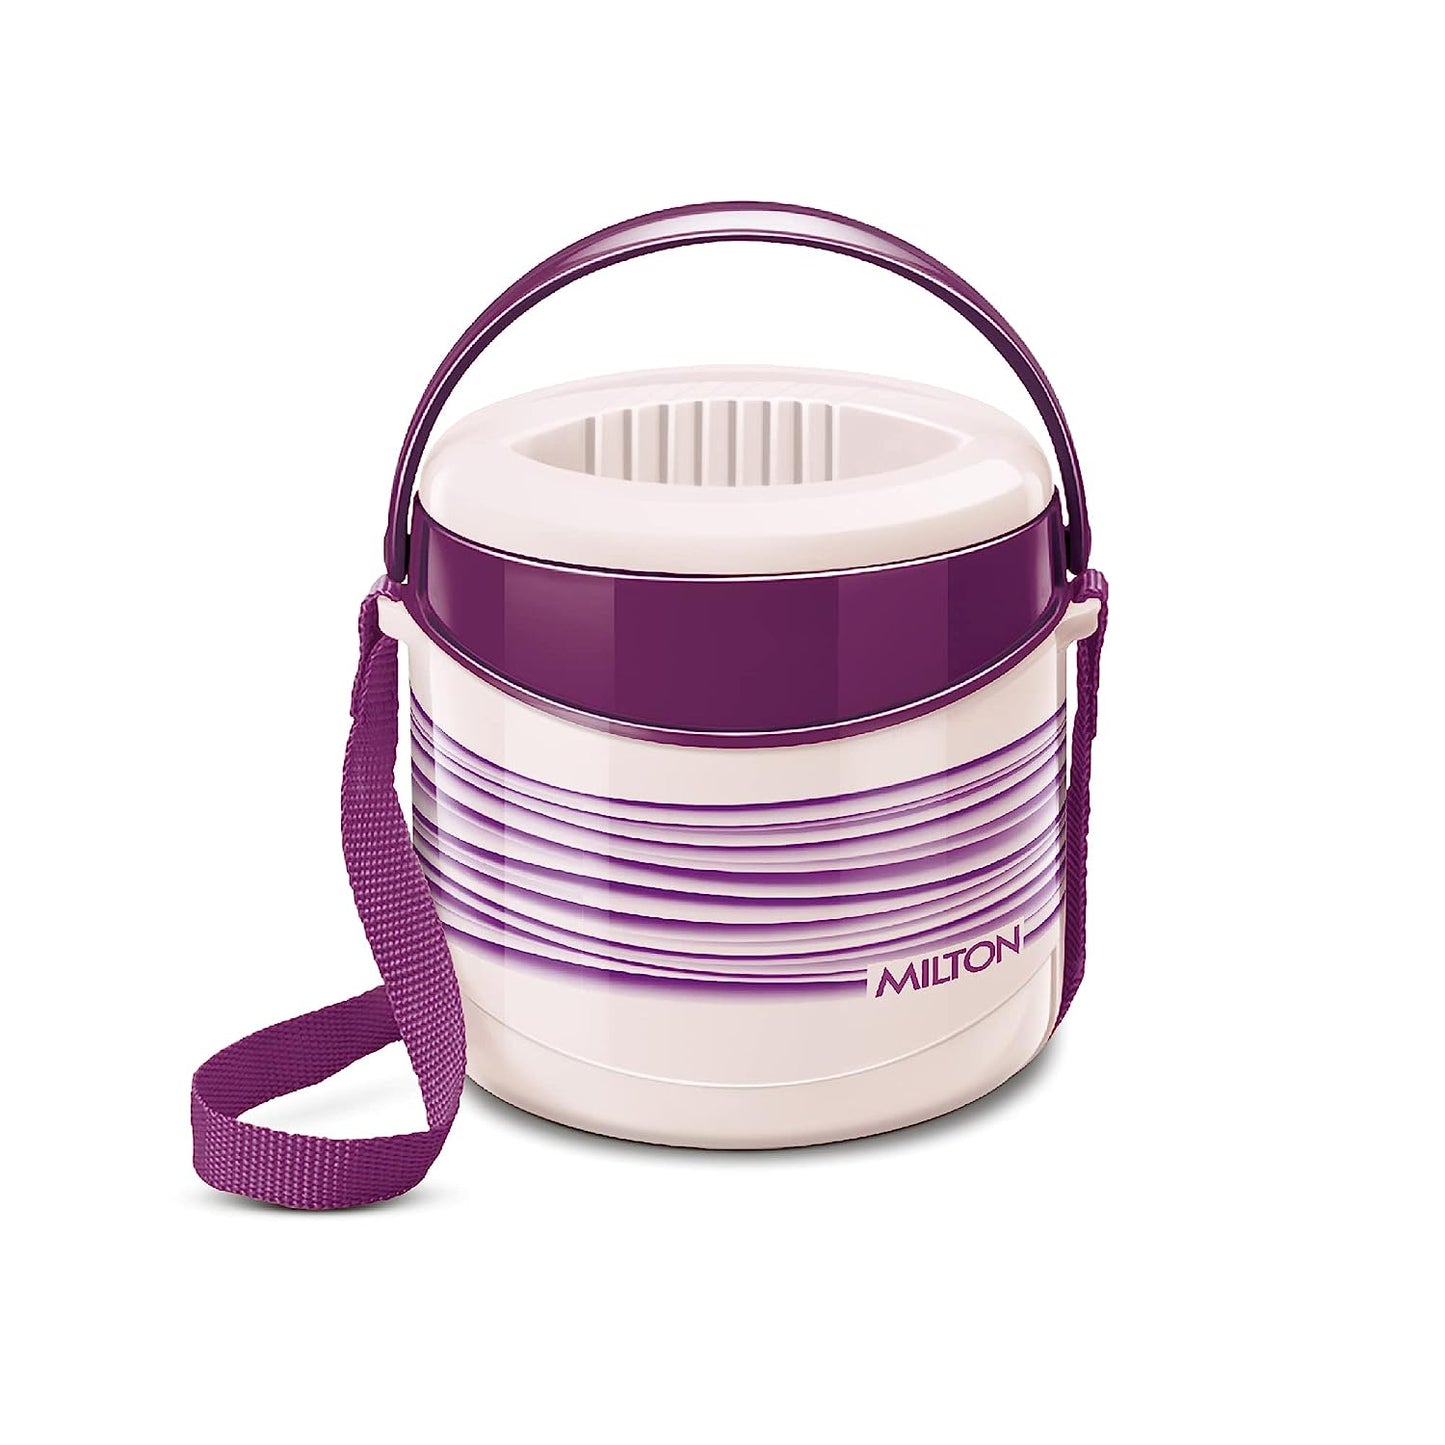 Milton Econa Thermoware PU Insulated Stainless Steel Lunch Box